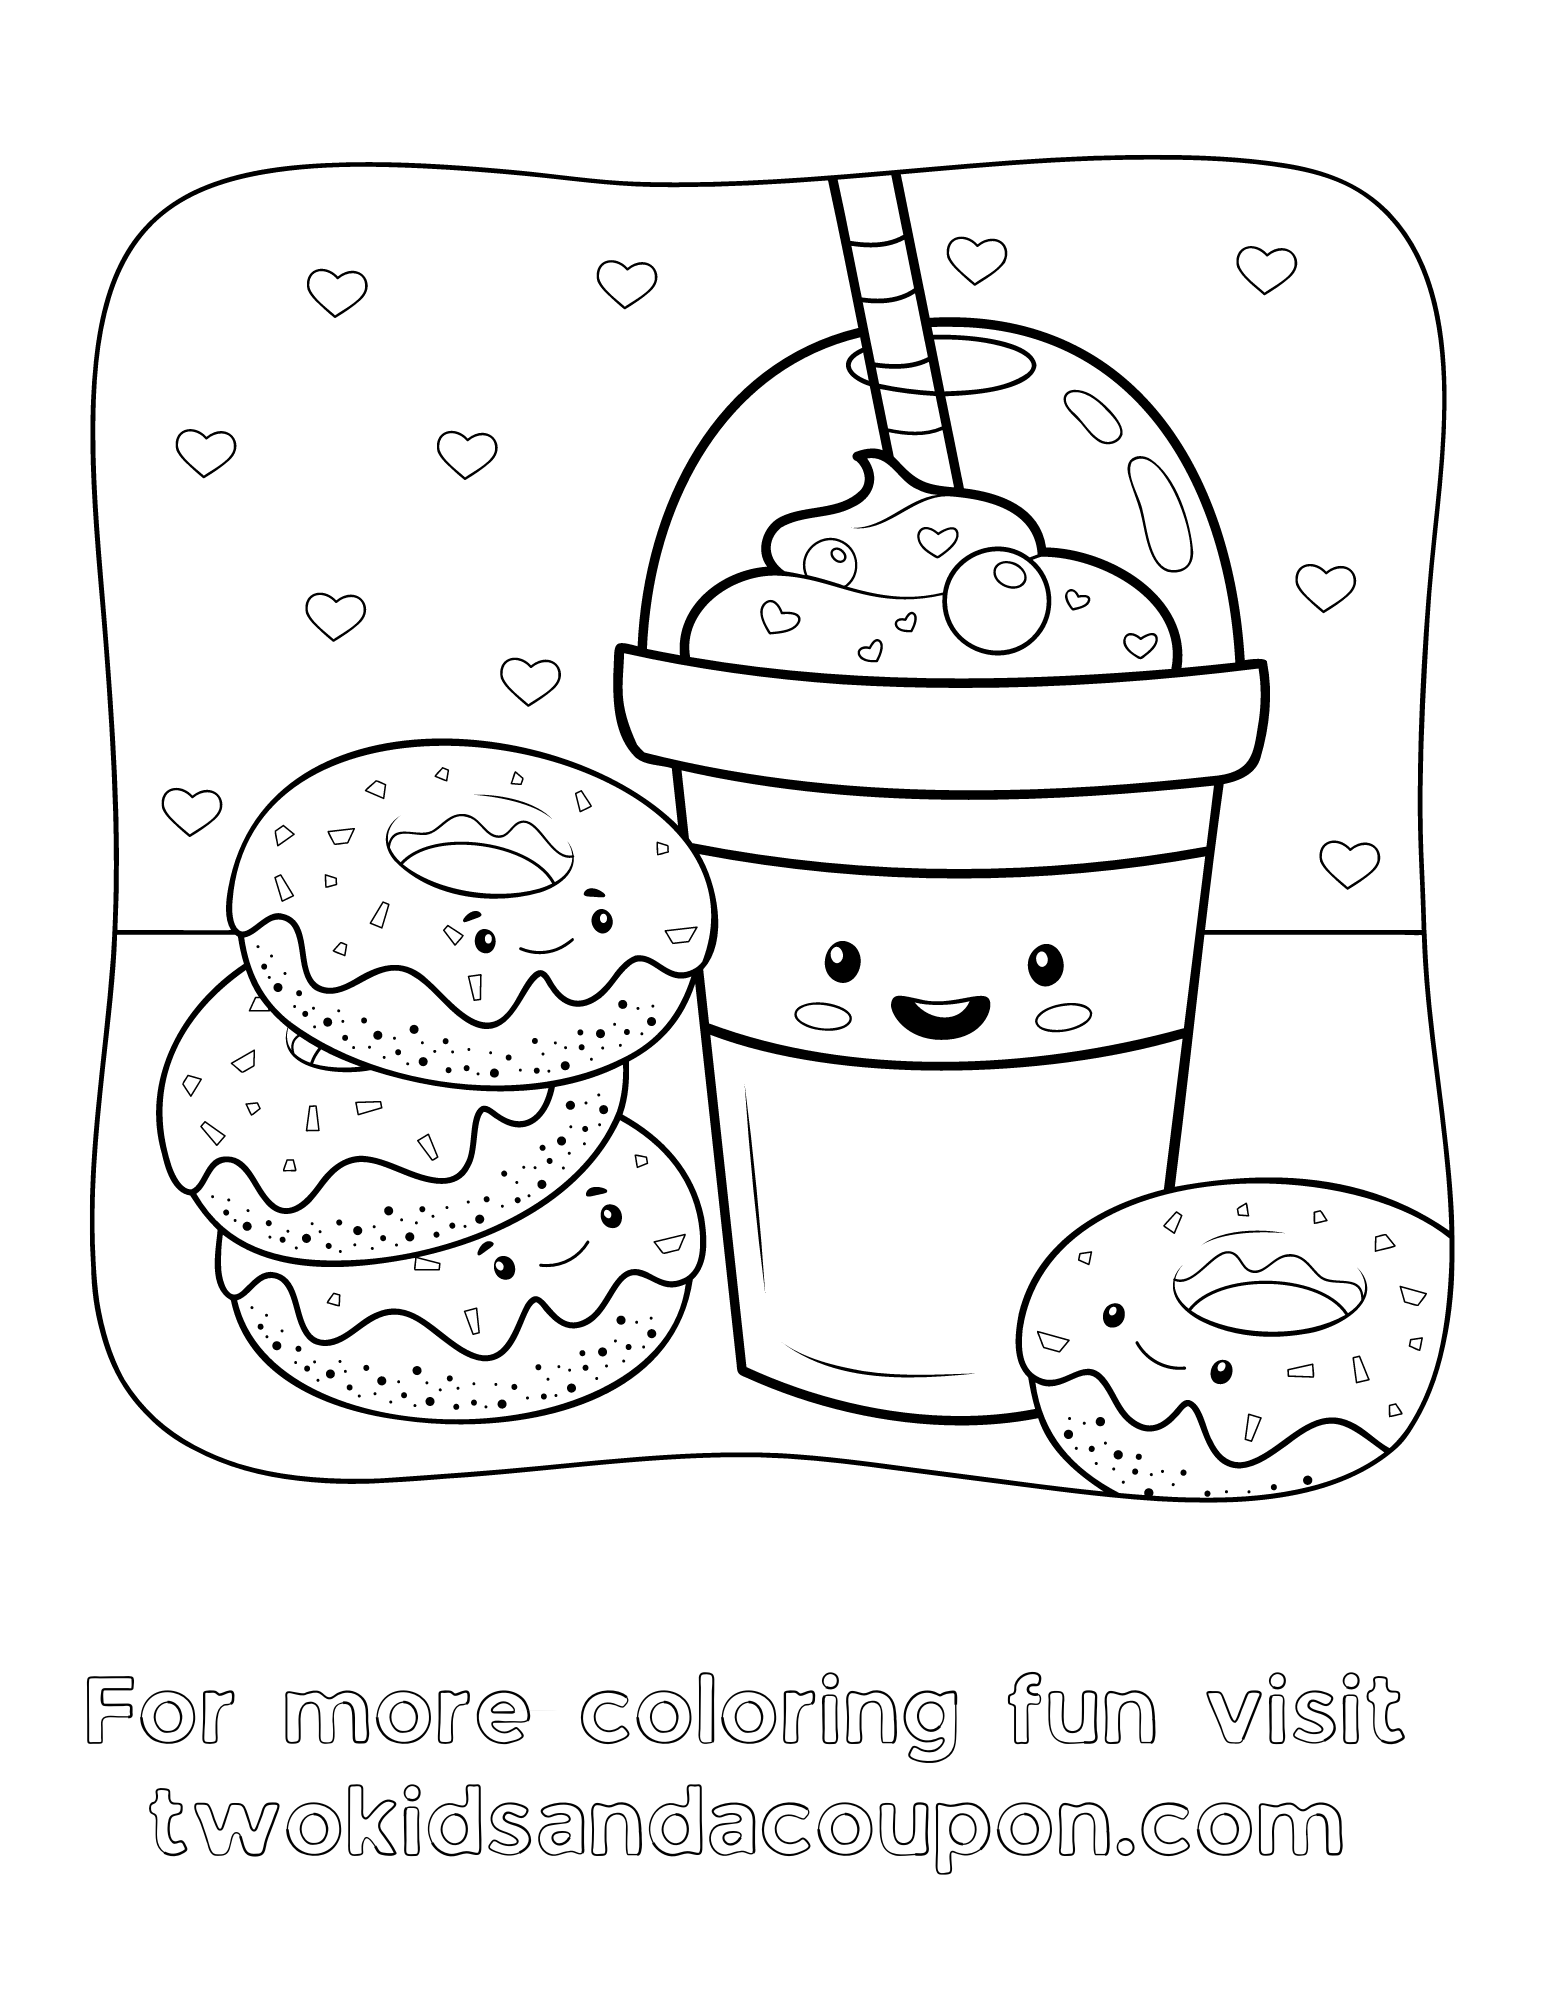 31 Donut Coloring Pages Printable 2